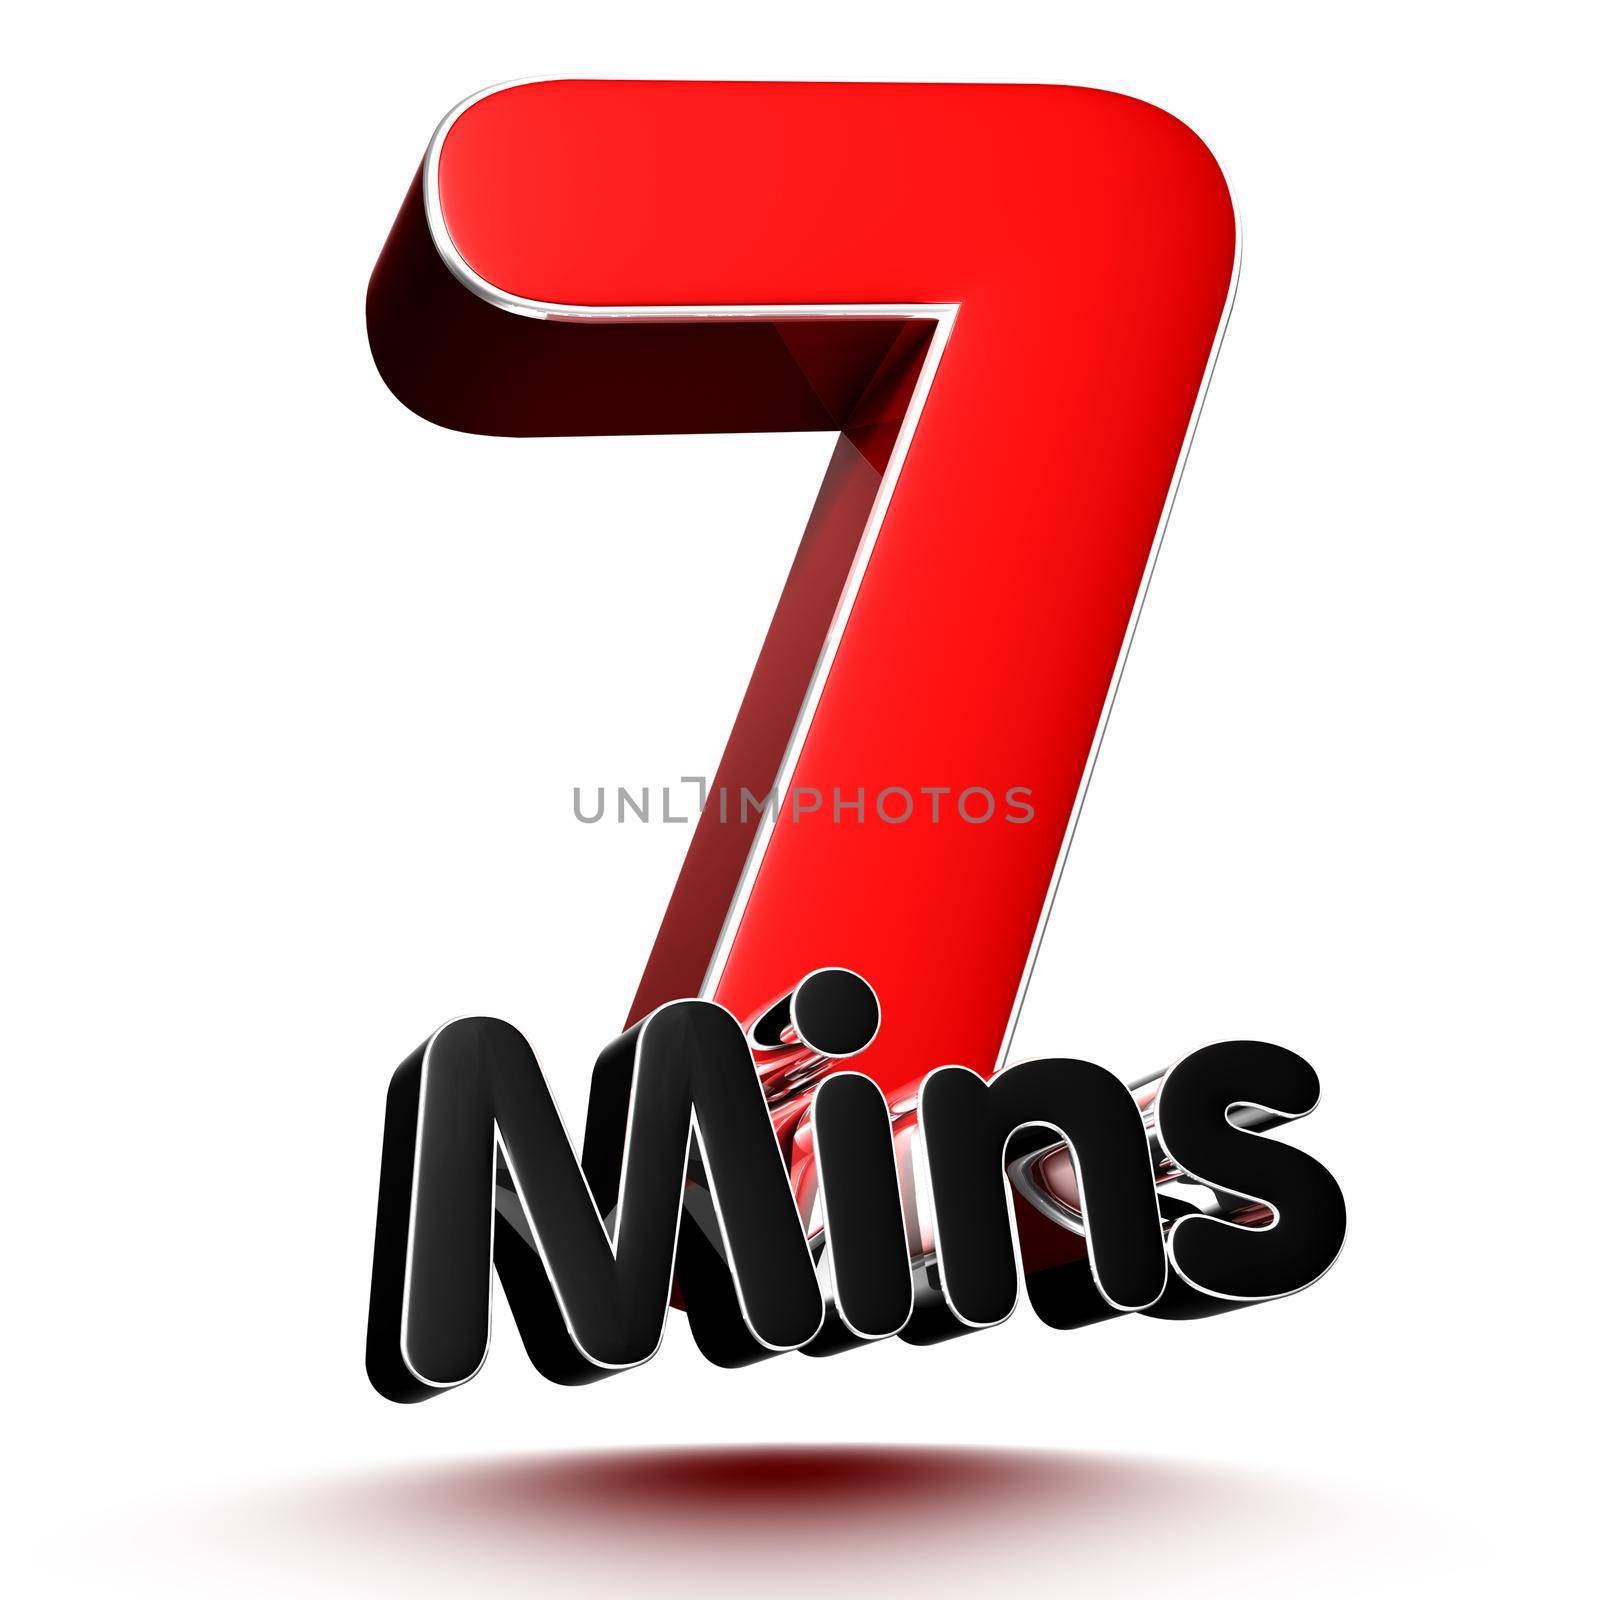 7 mins isolated on white background illustration 3D rendering with clipping path. by thitimontoyai